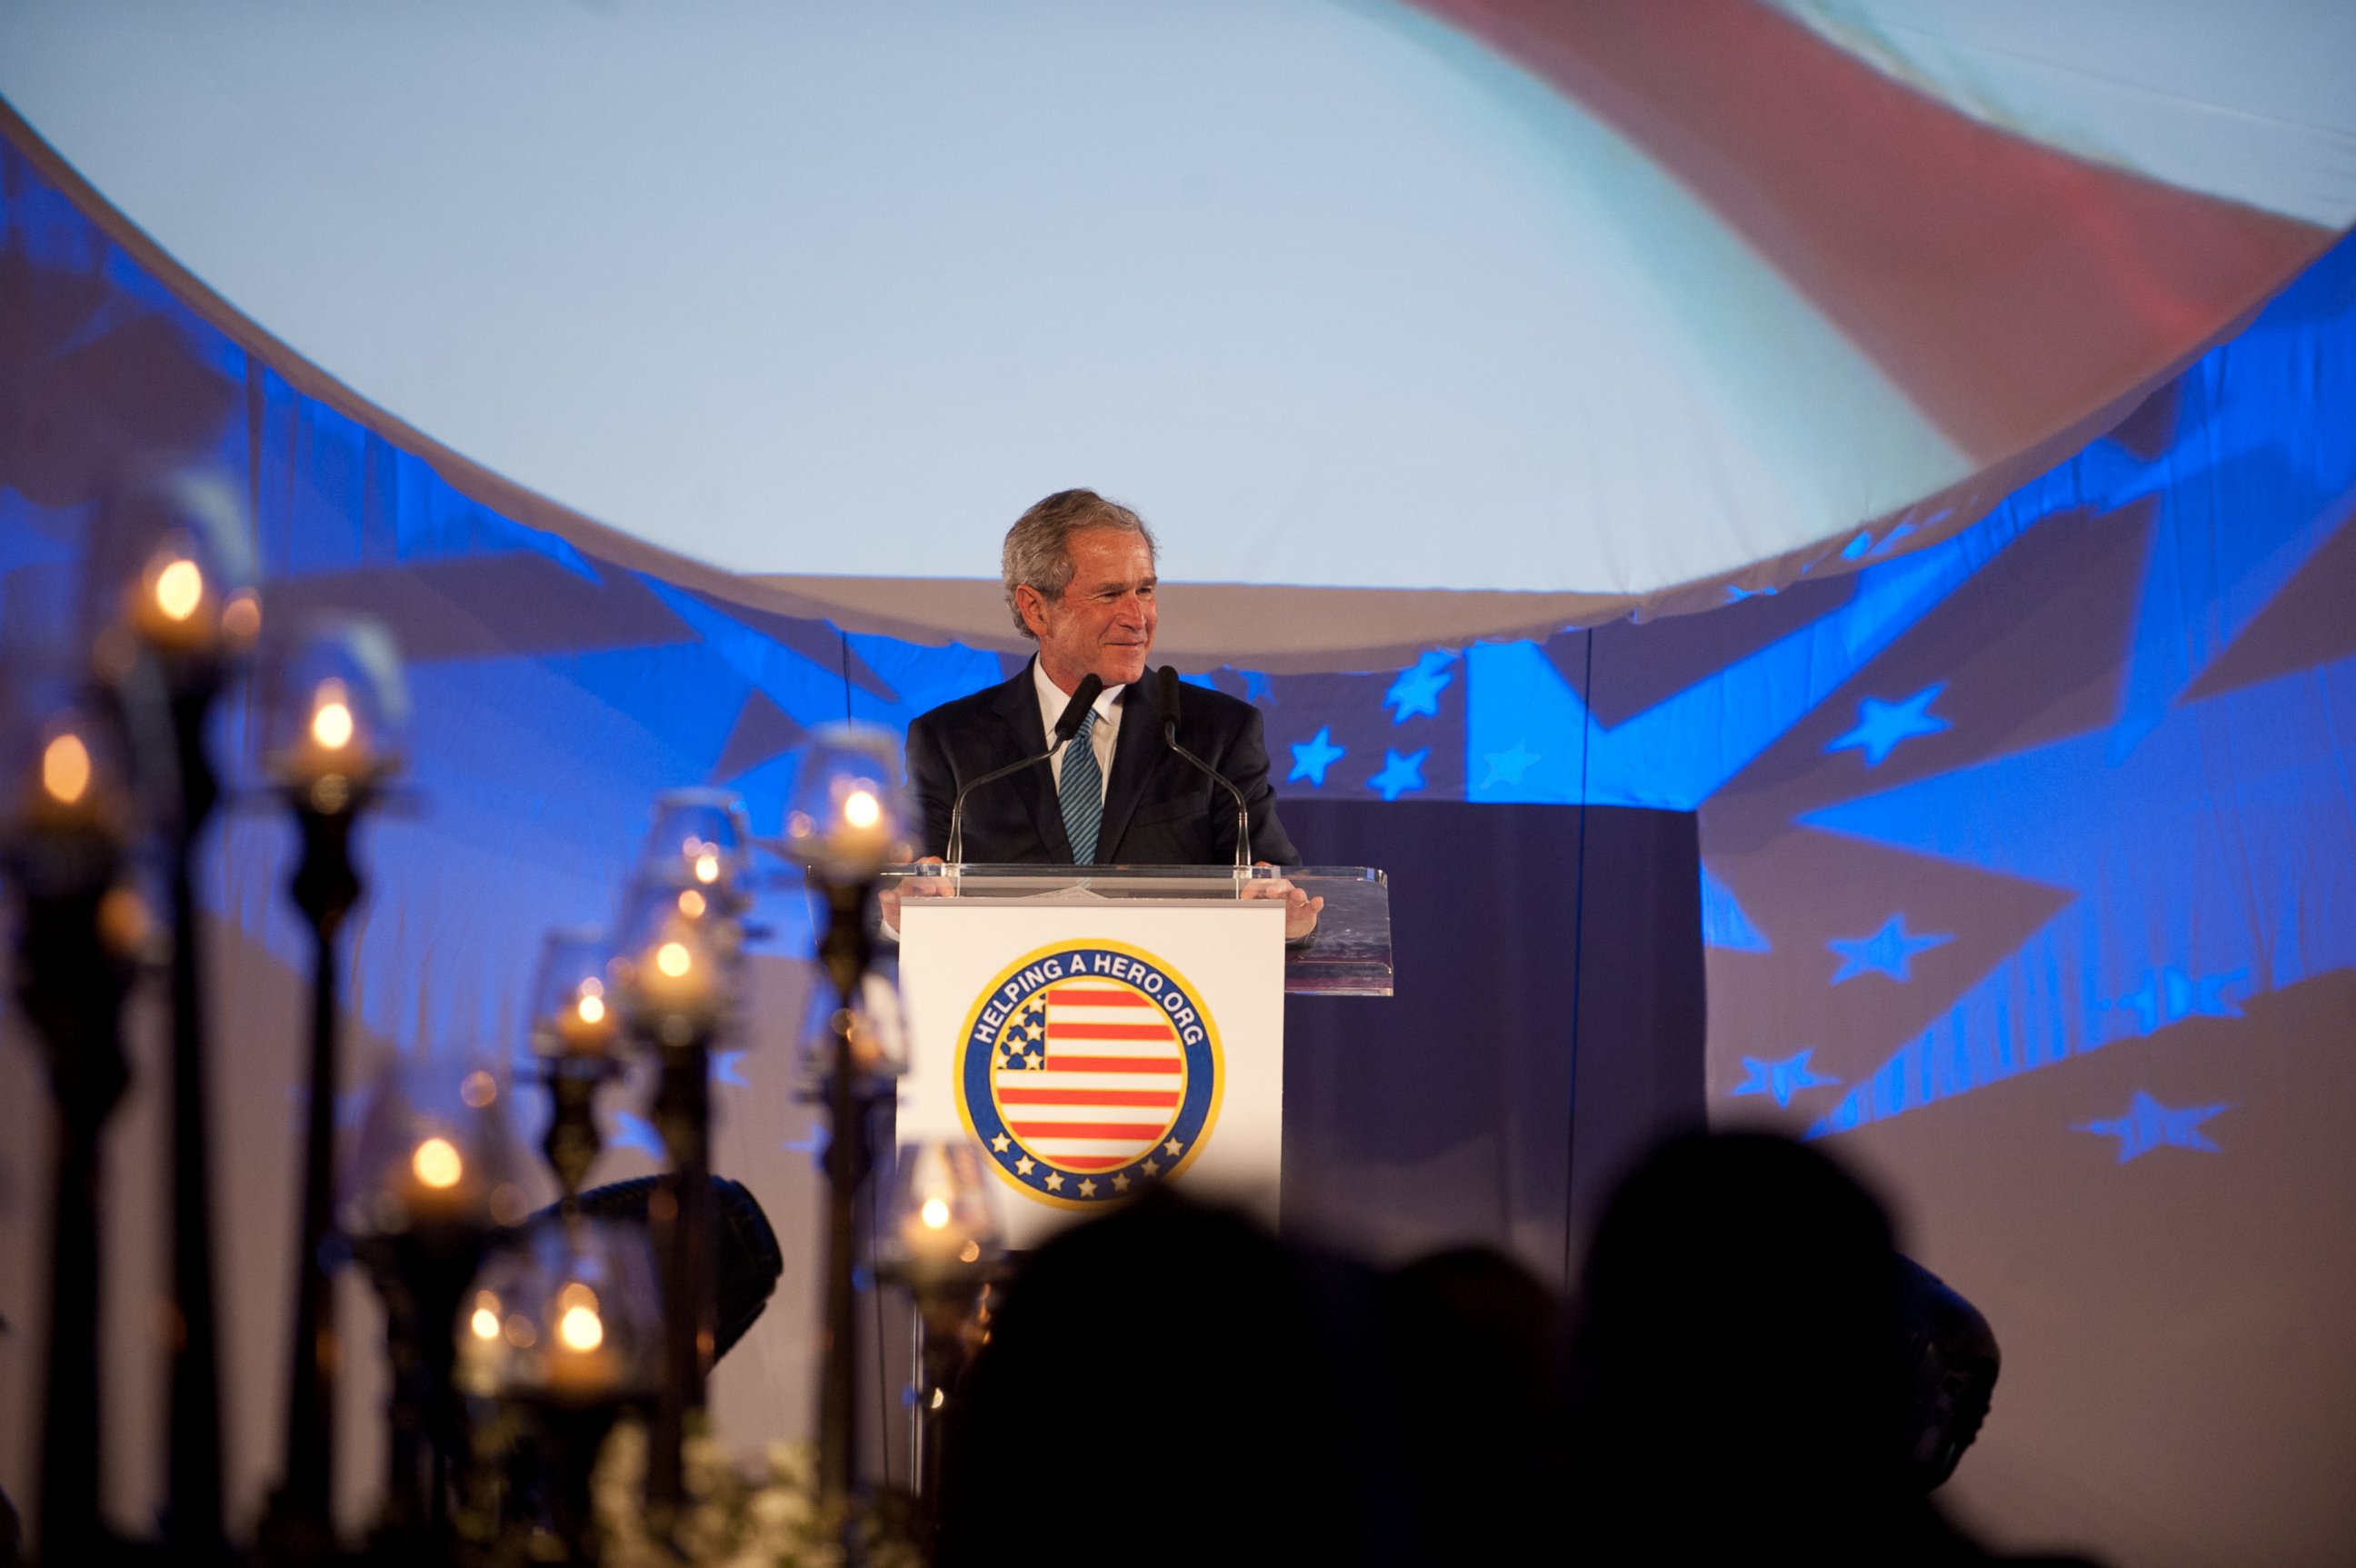 PHOTO: Former President George W. Bush speaks at an event for the Helping a Hero charity in 2012.